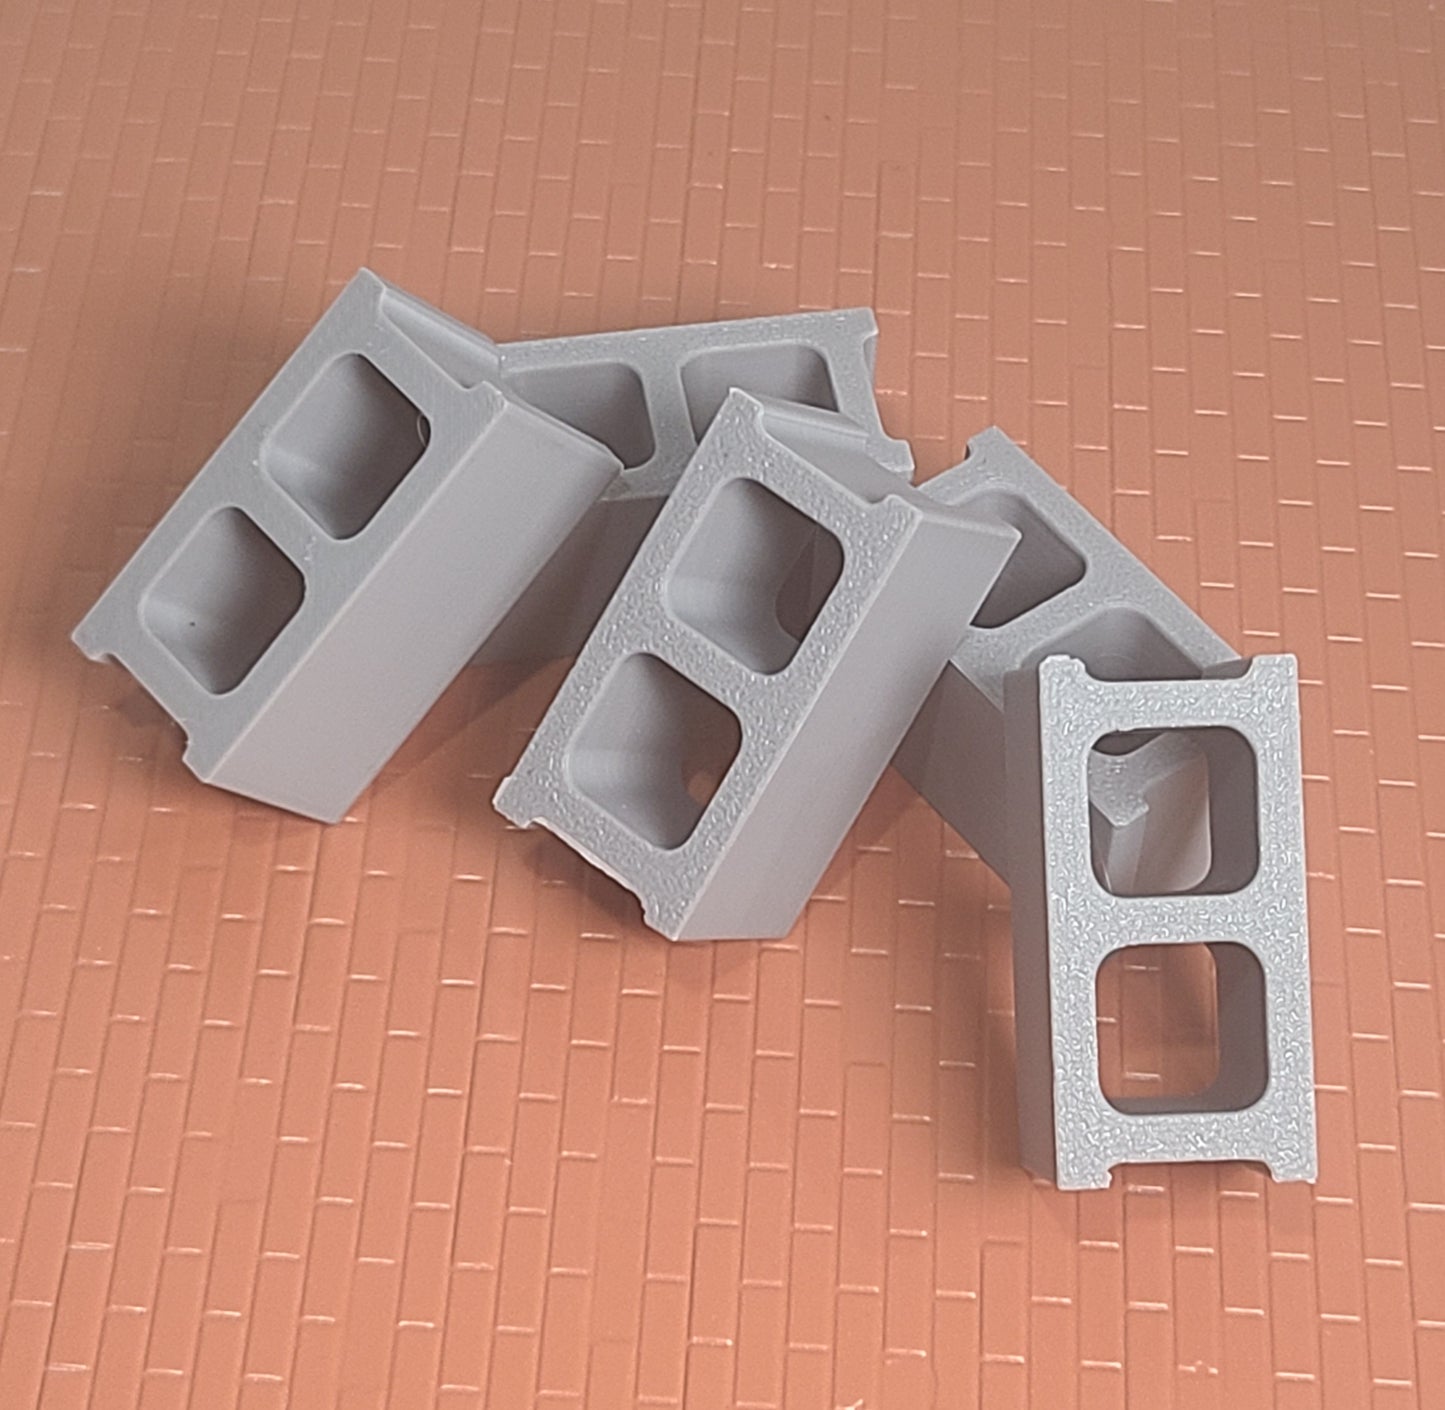 1:18 Scale Miniature Cinder Blocks for bases or dioramas